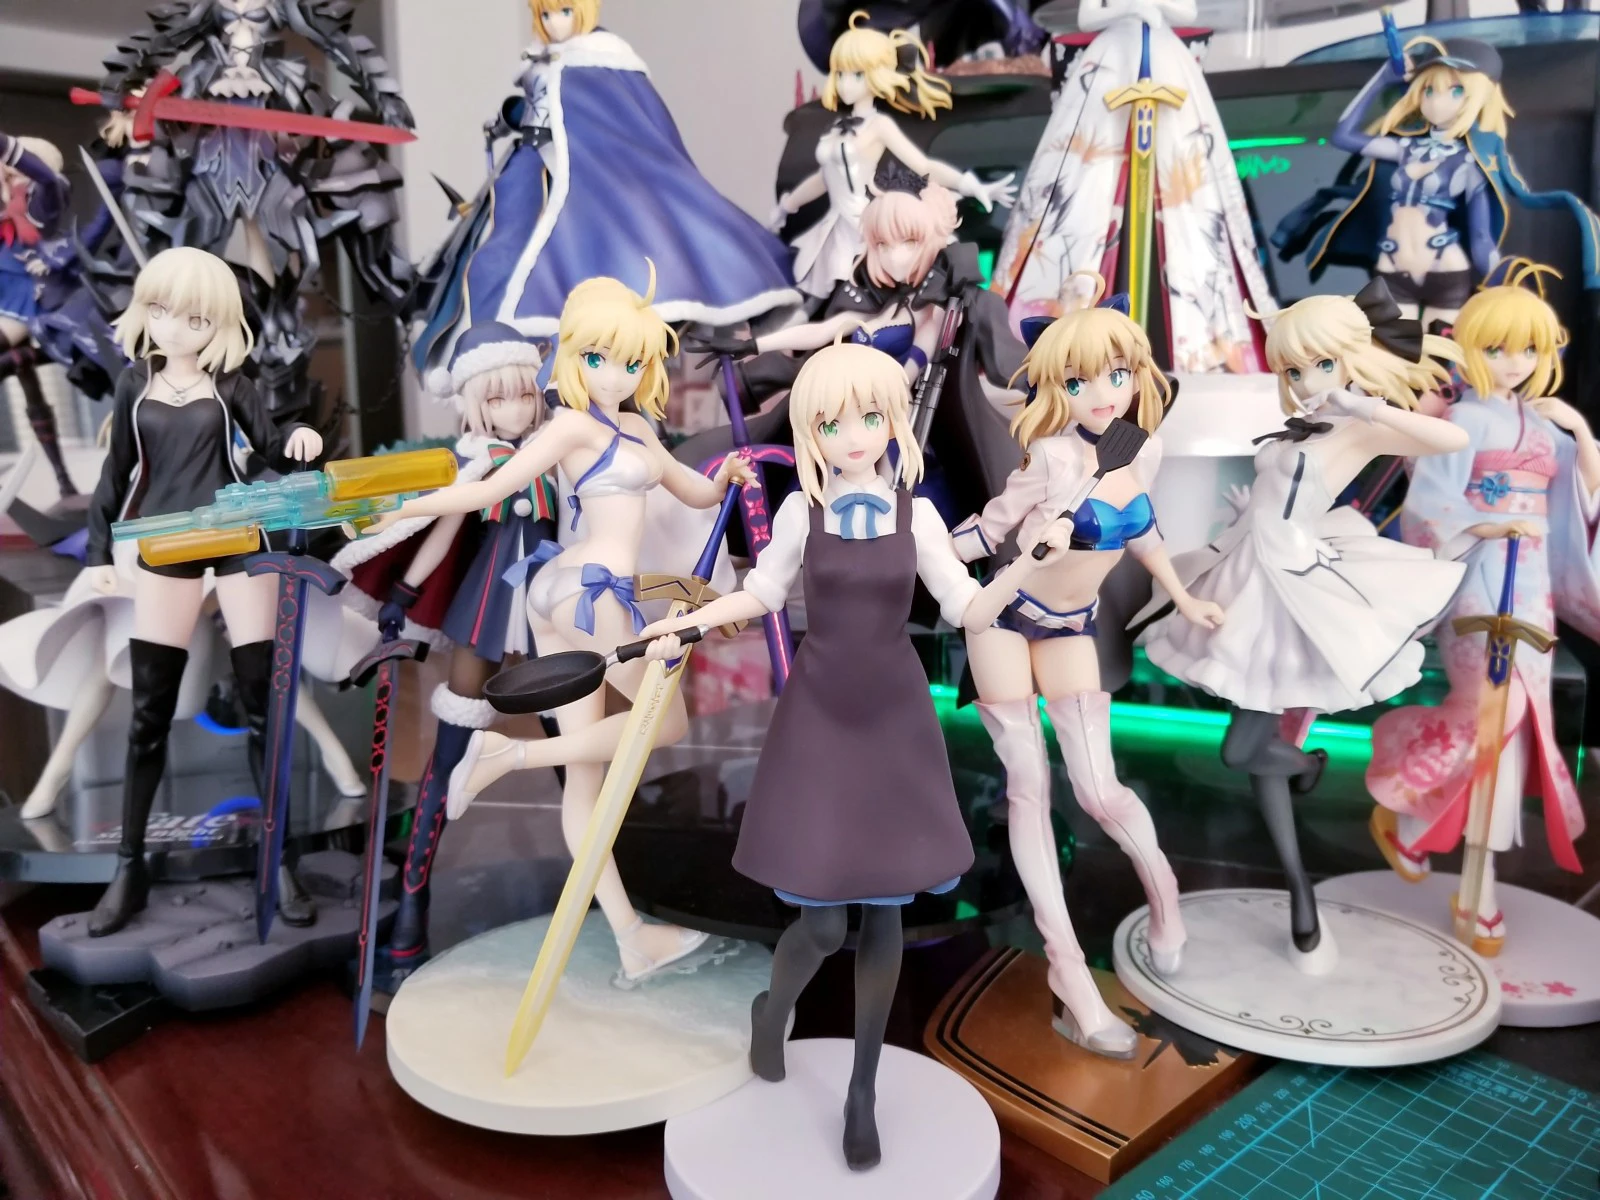 Details about   2020 NEW Anime Fate Saber Girl PVC Action Figure Collectible Model Toys For GIFT 